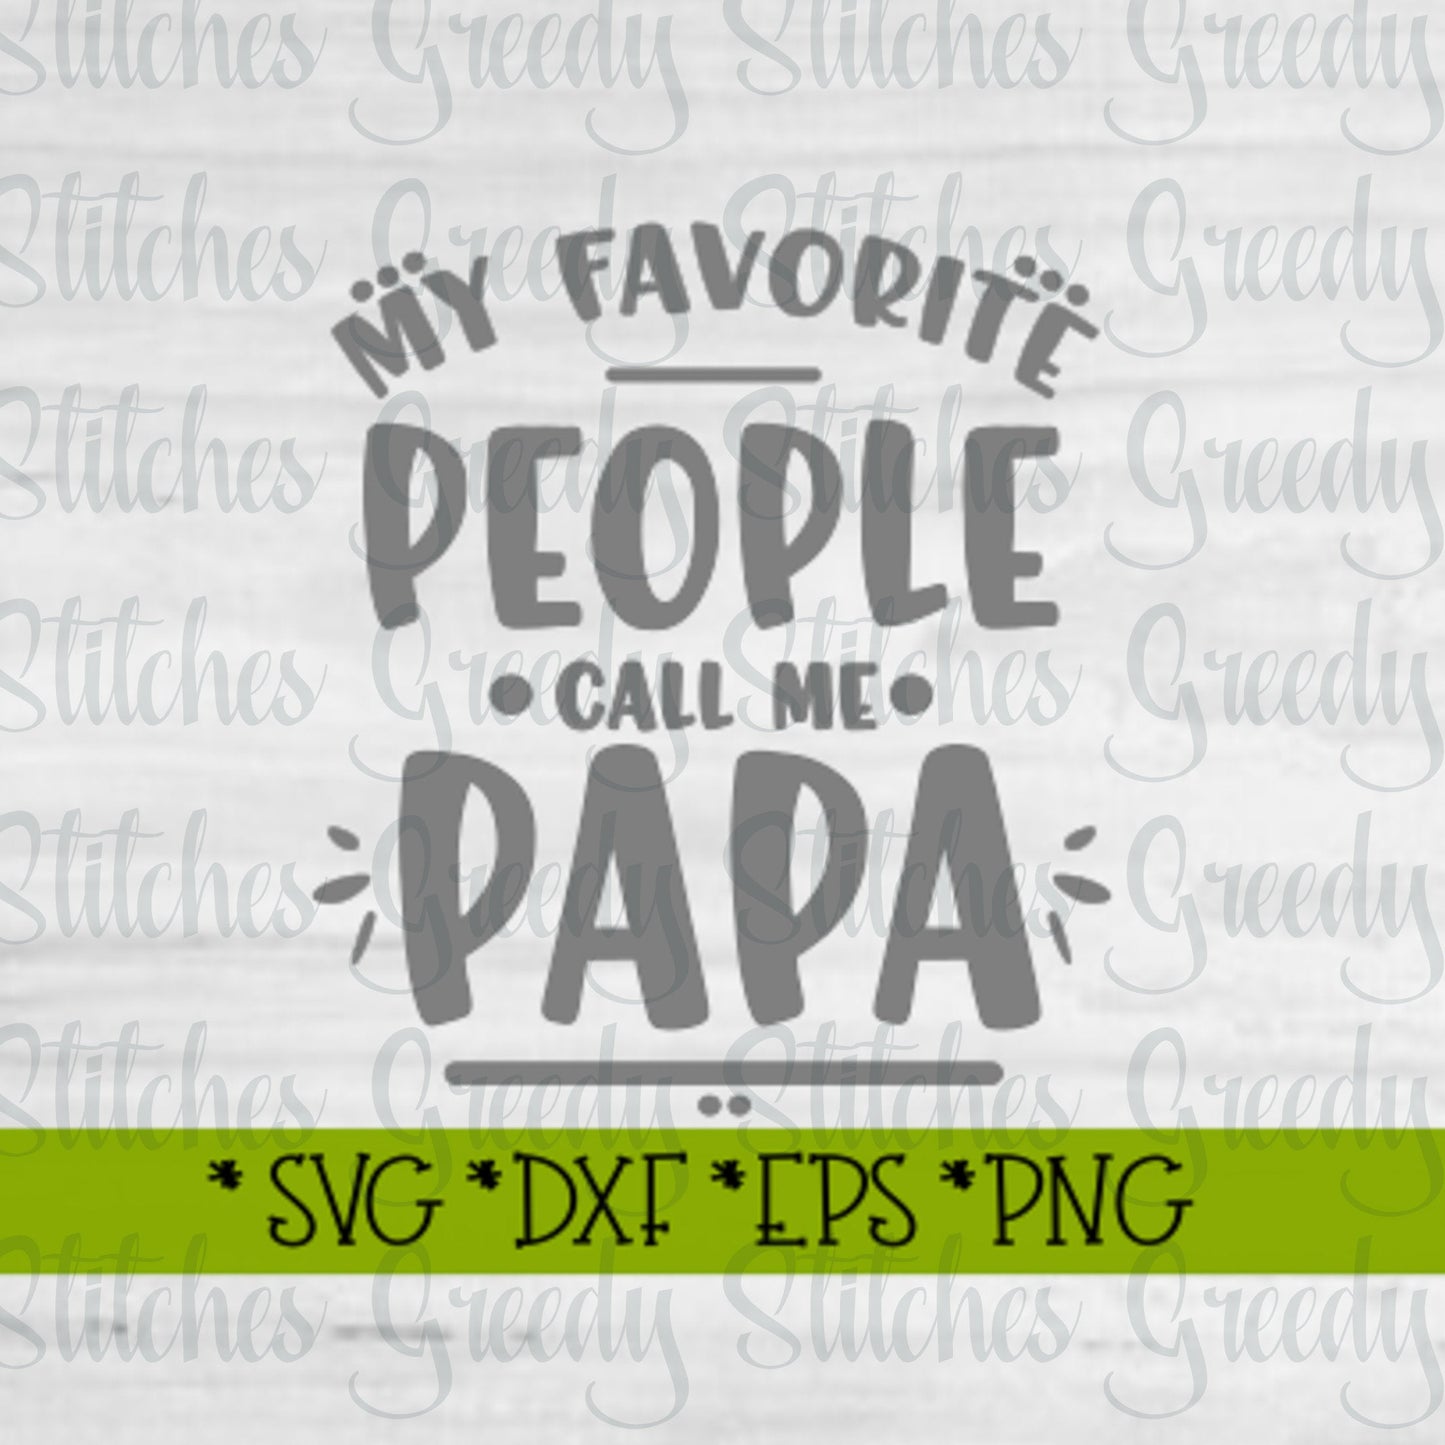 Father&#39;s Day SVG | My Favorite People Call Me Papa SVG | Papa svg, dxf, eps, png.  Papa SVG | Father&#39;s Day SvG | Instant Download Cut File.